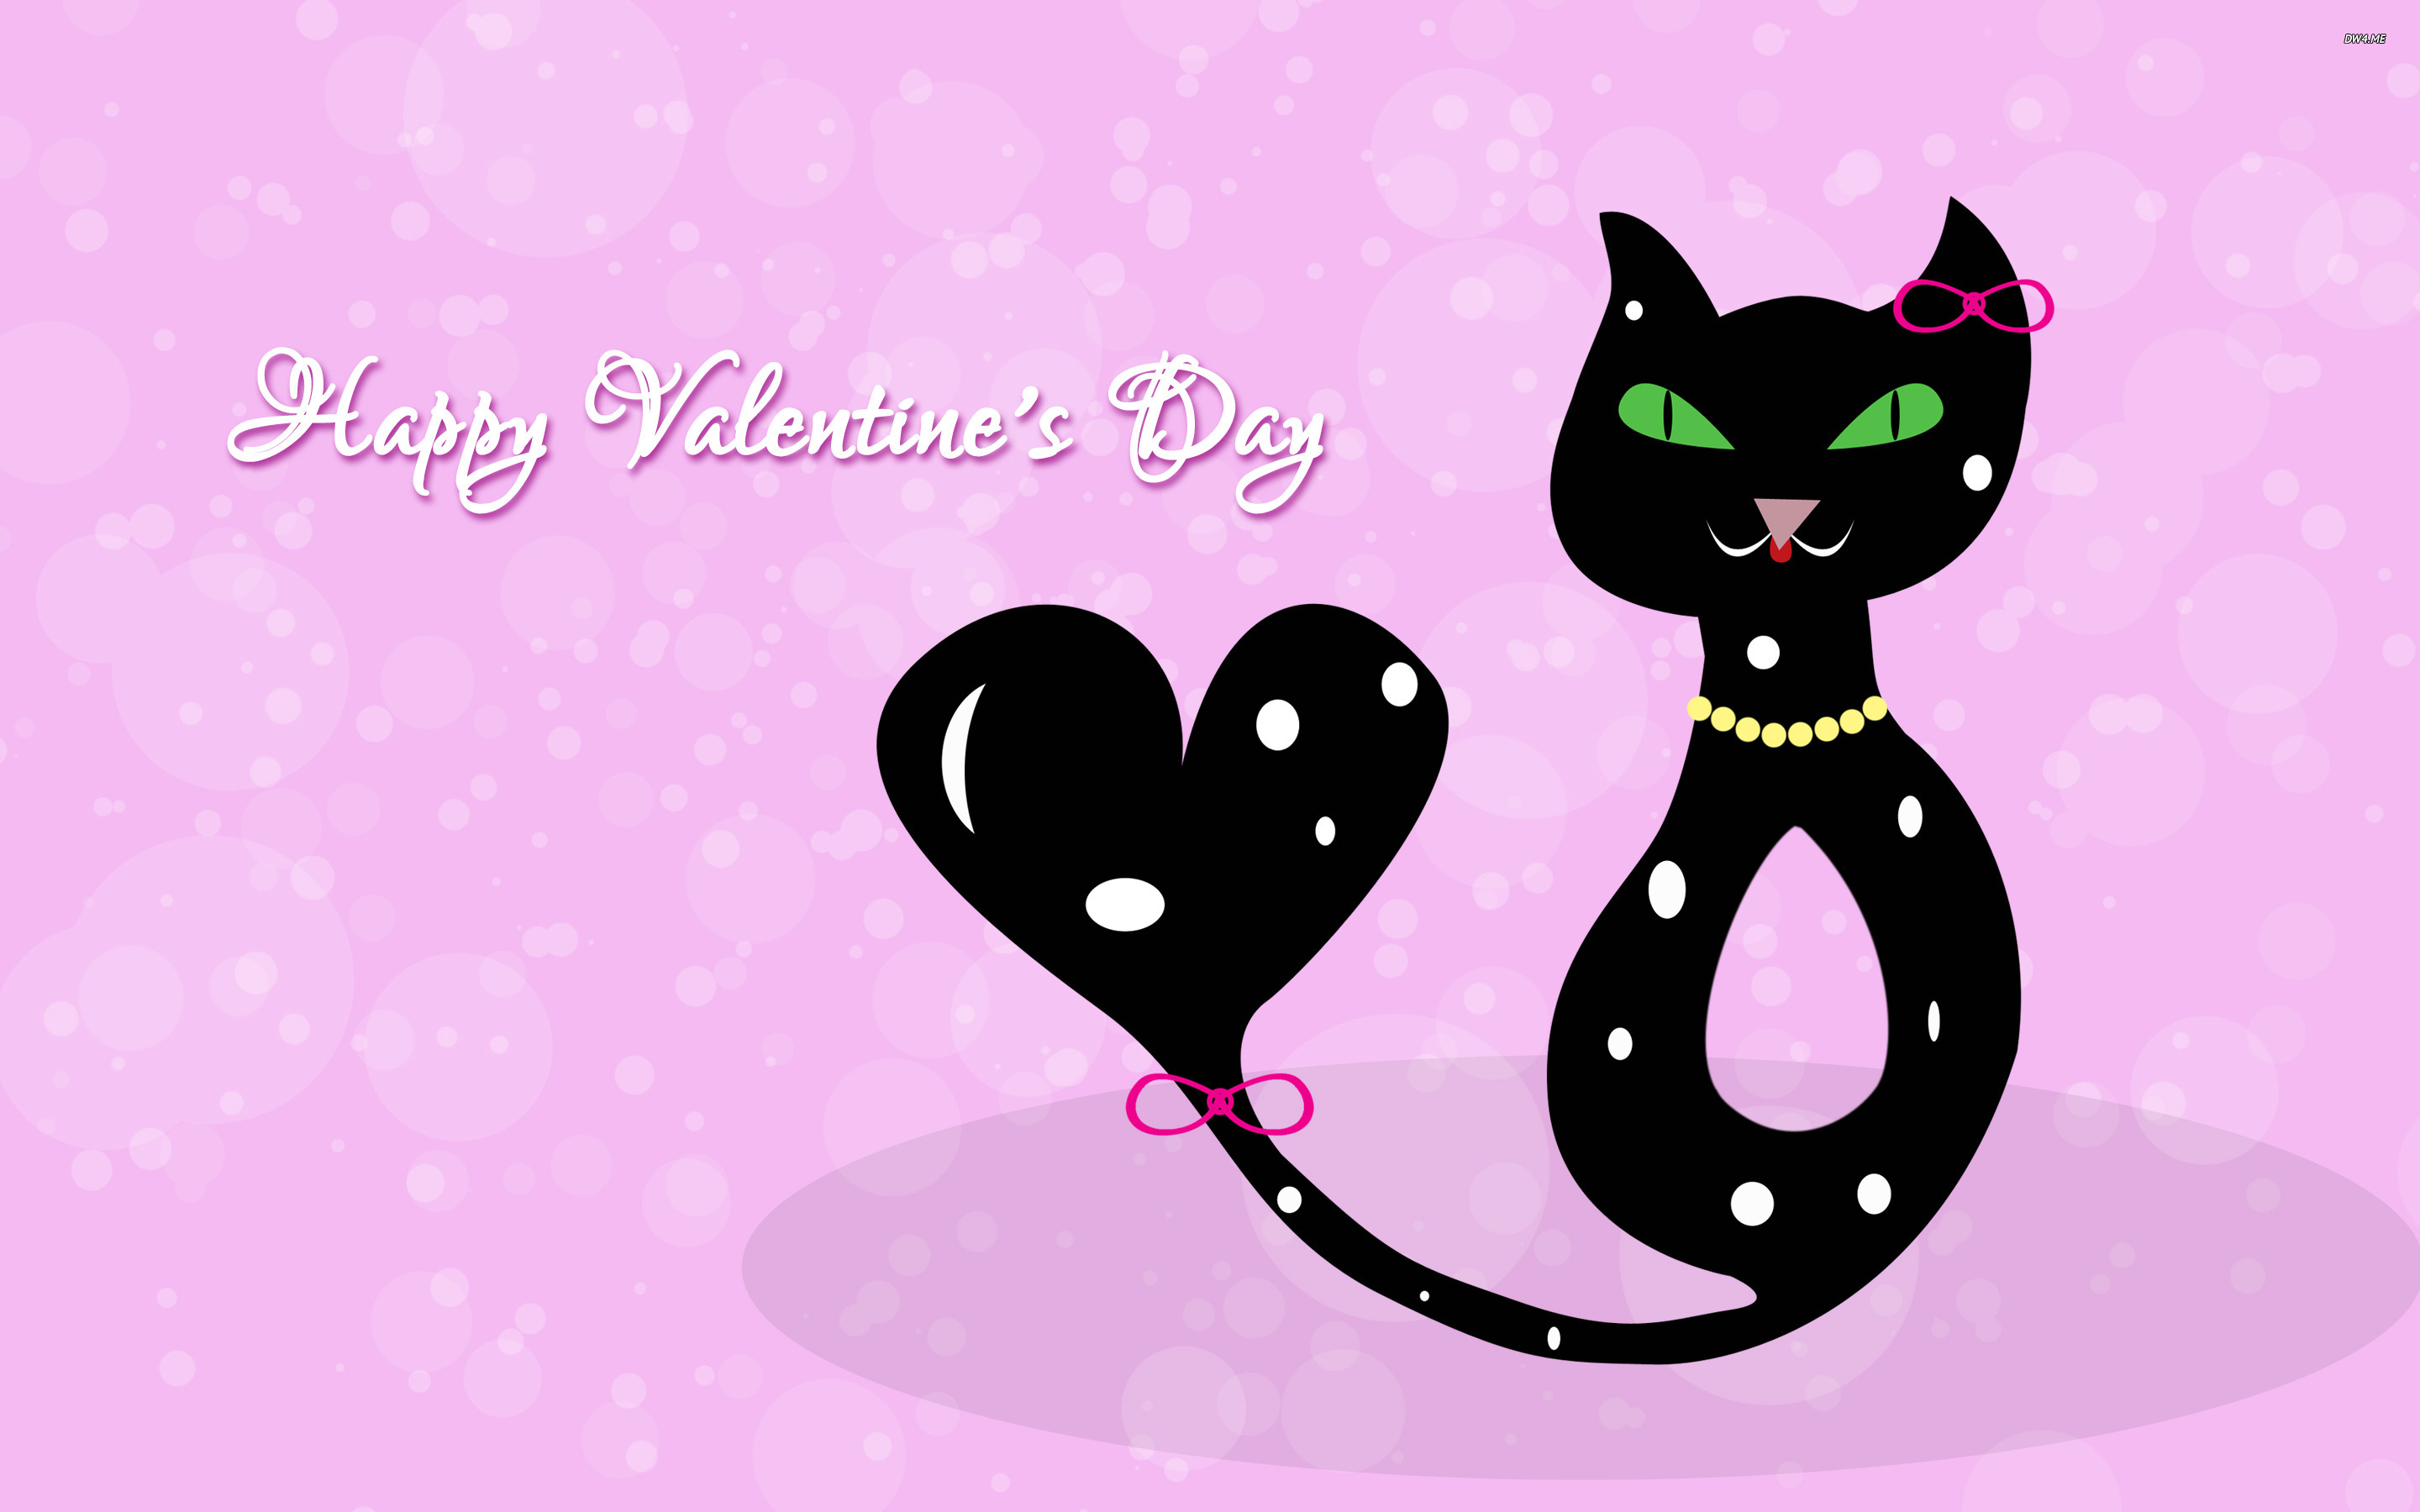 Wallpaper Kitten, Black Cat, Whiskers, Valentines Day, Cat, Background Free Image